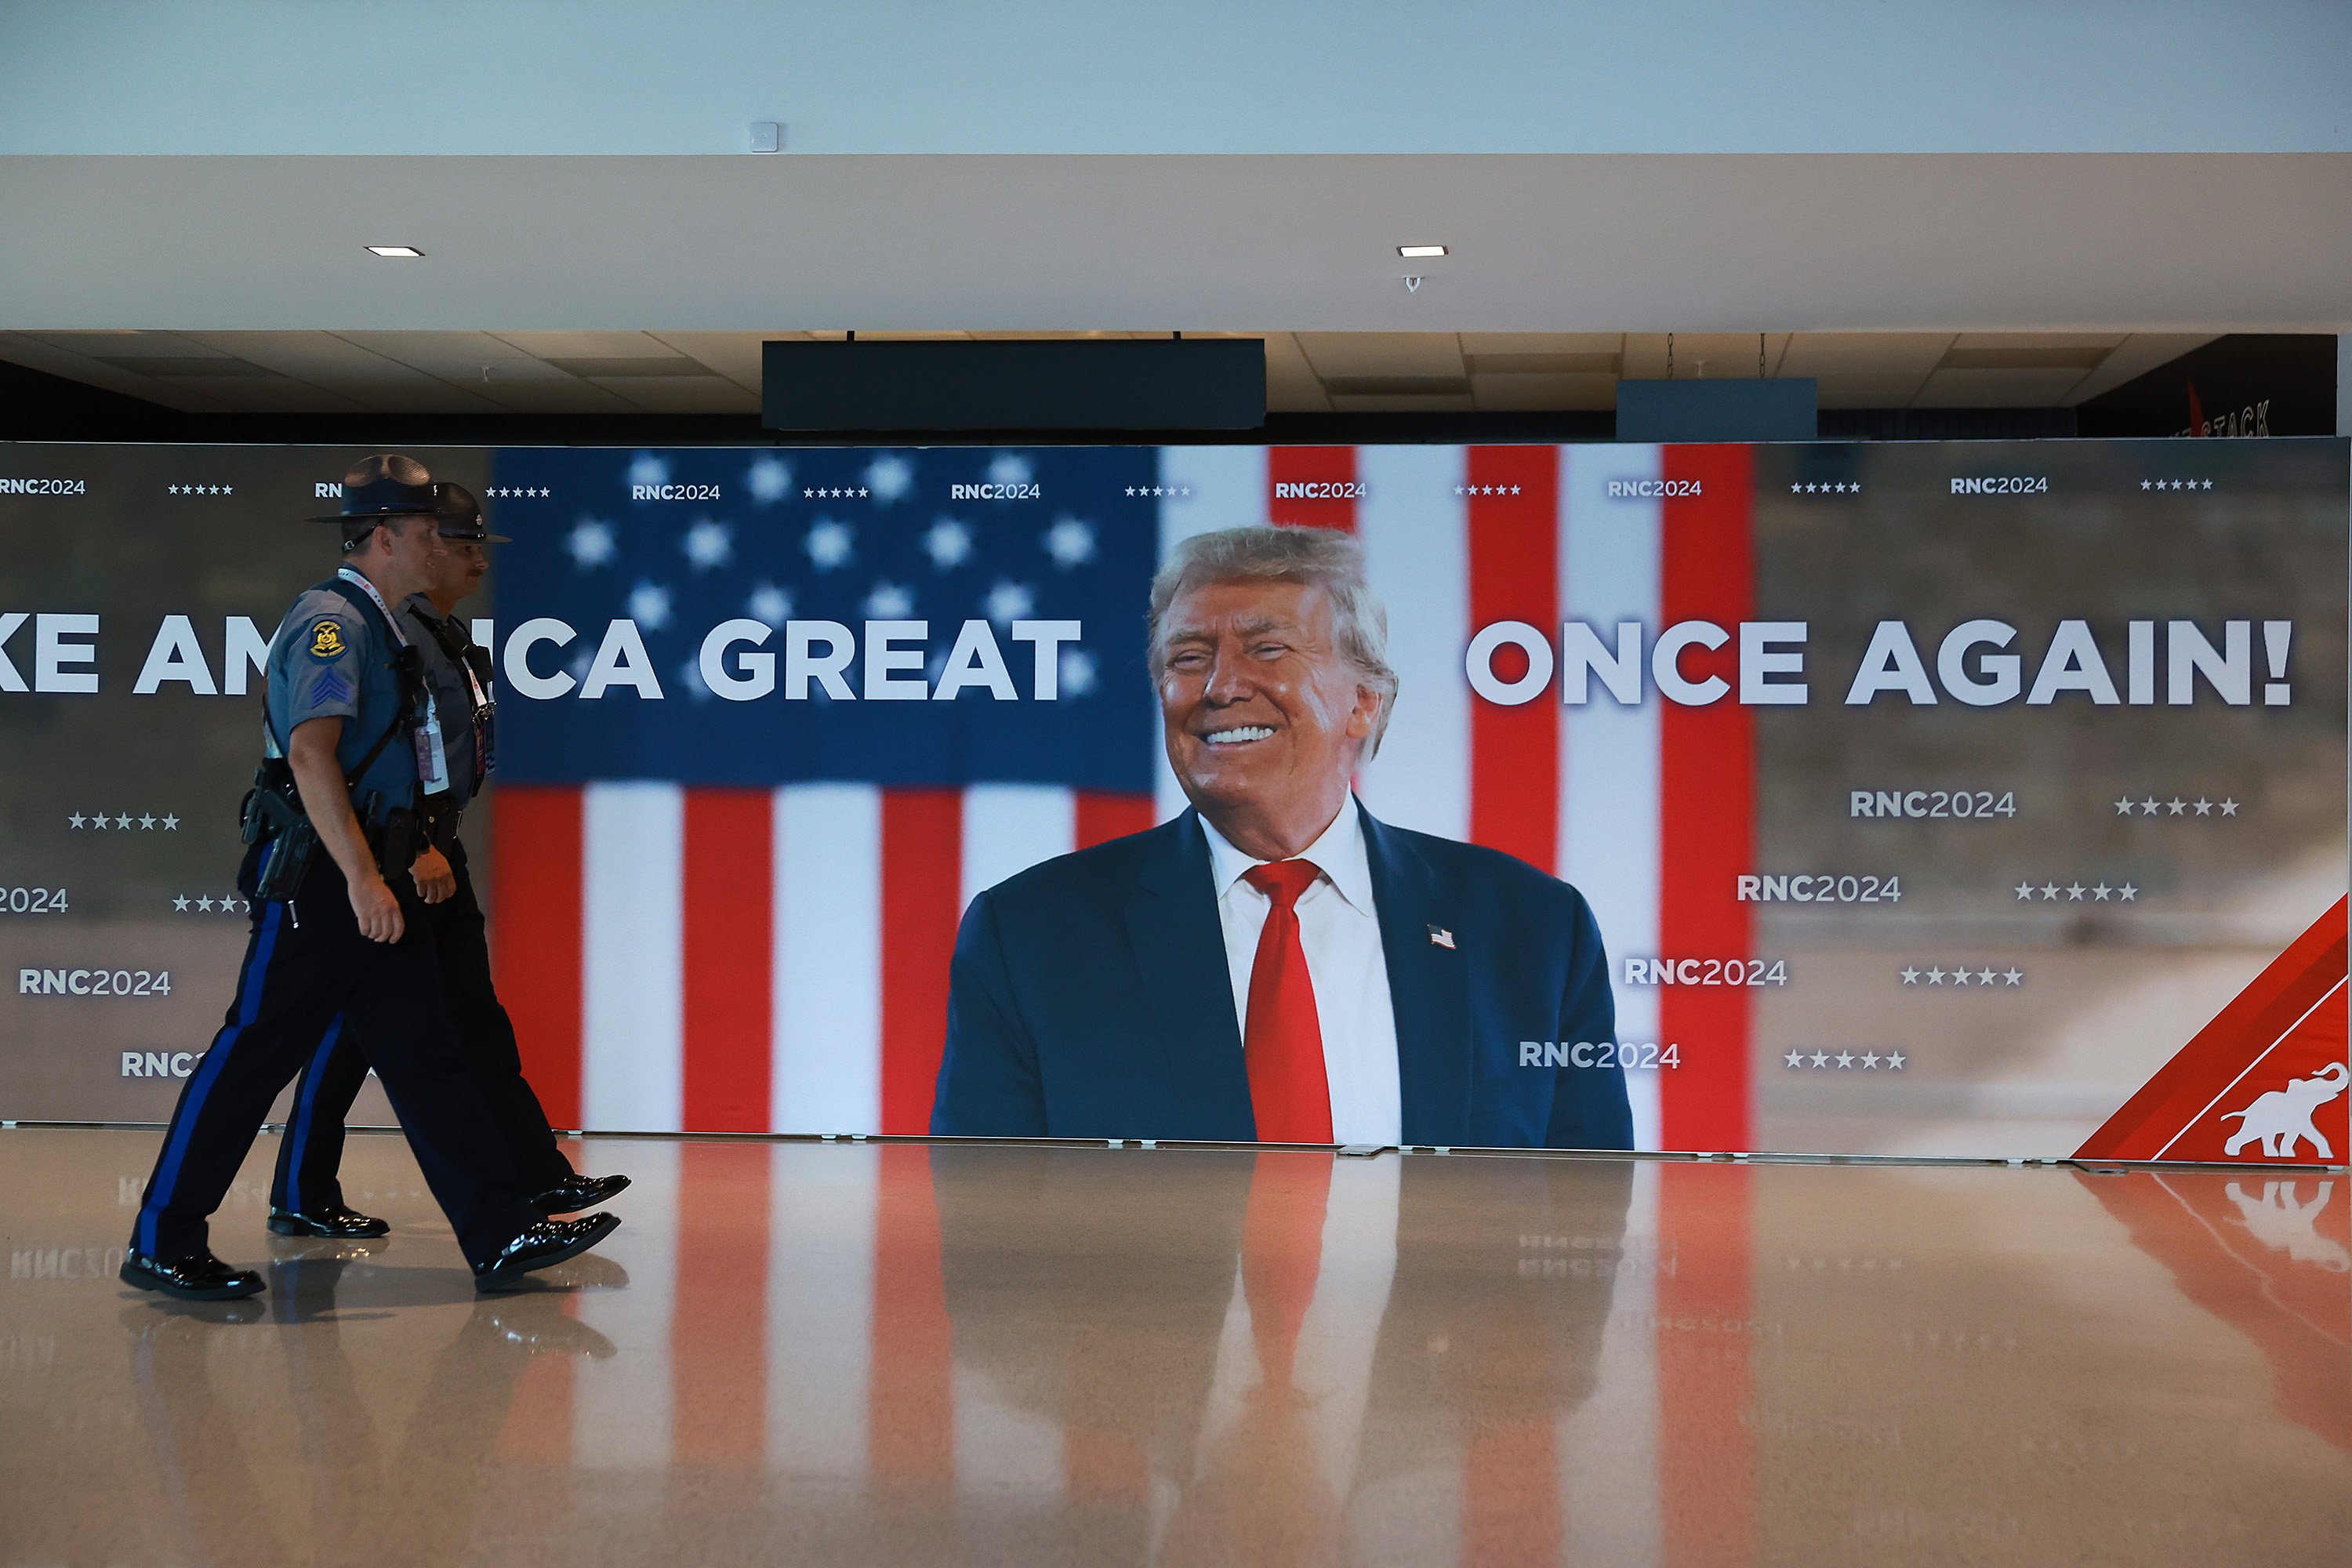 A Donald Trump sign in the Fiserv Forum at the Republican National Convention in Milwaukee. Photo: TNS